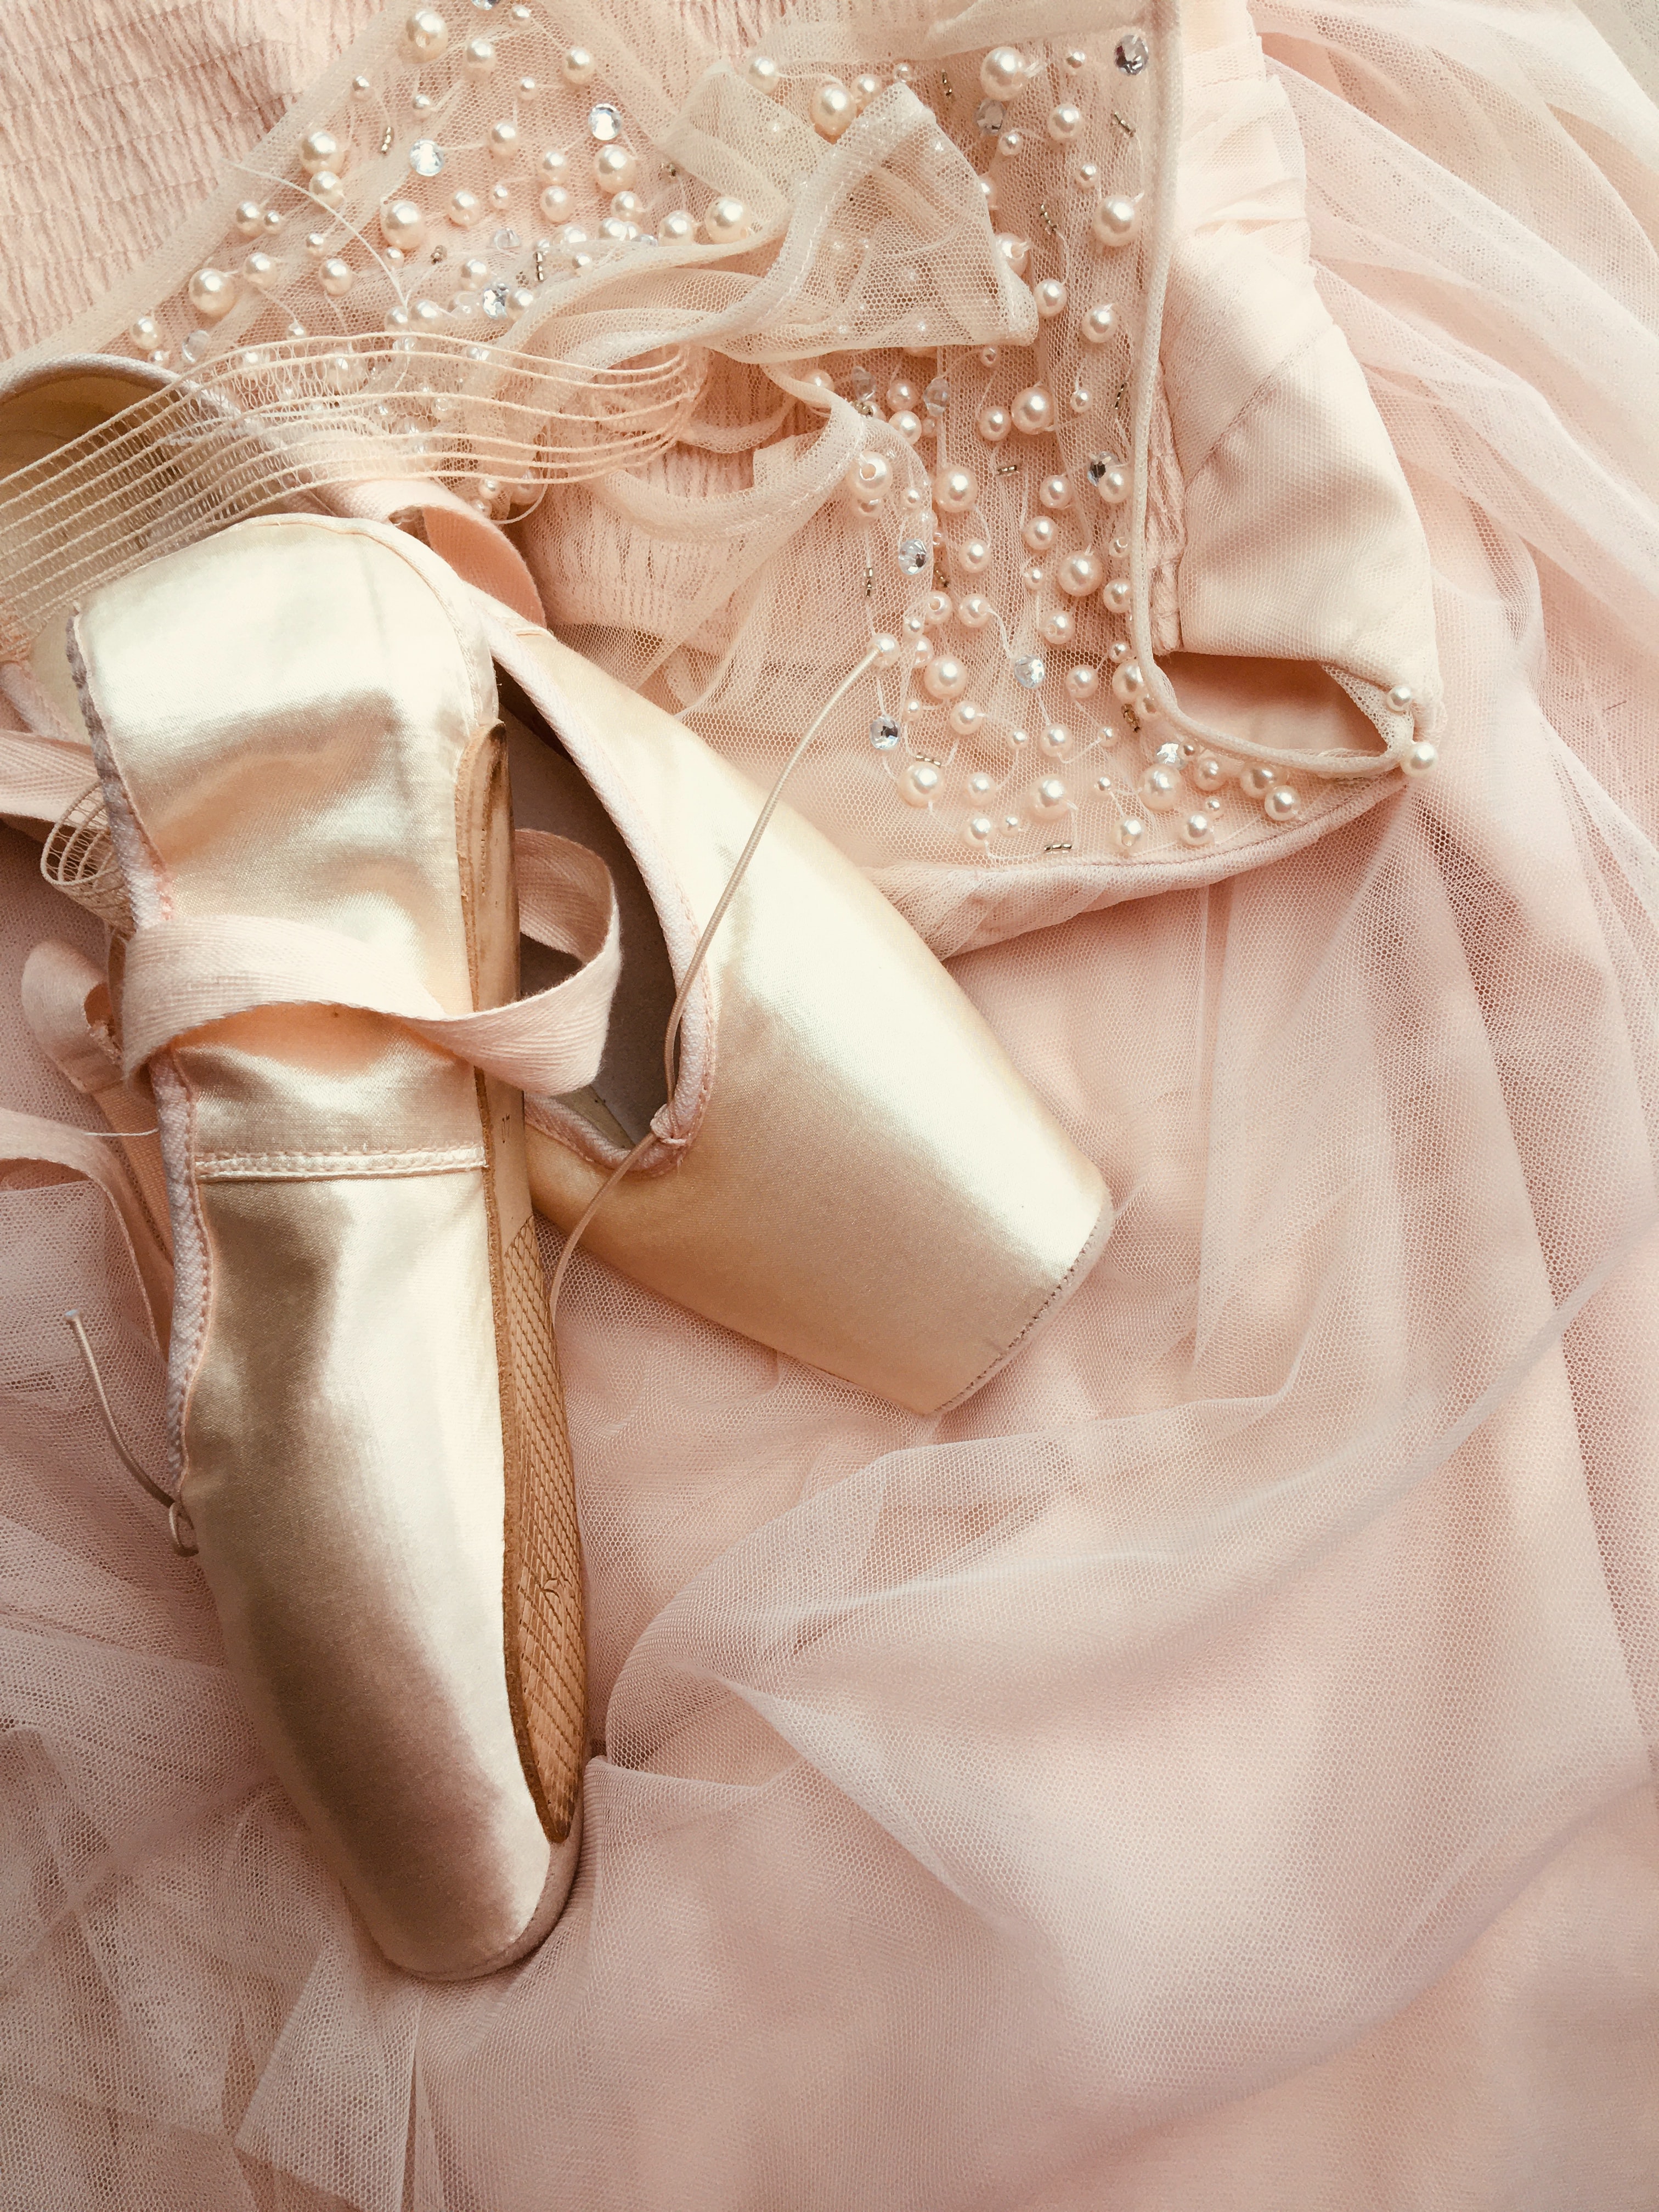 pointe shoes for ballet